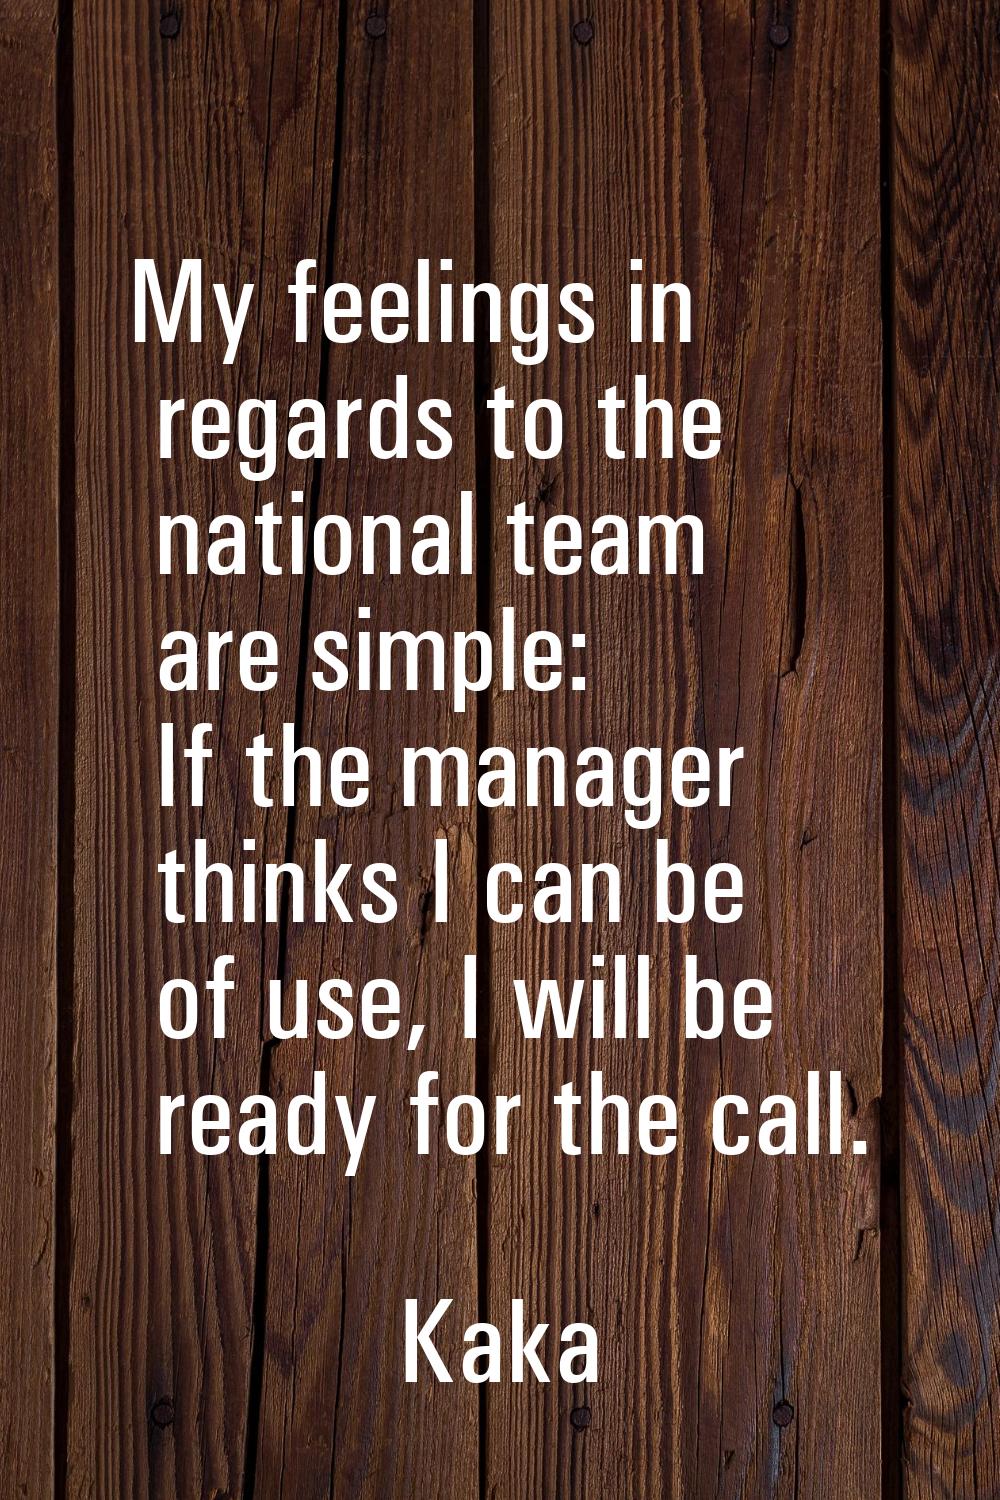 My feelings in regards to the national team are simple: If the manager thinks I can be of use, I wi